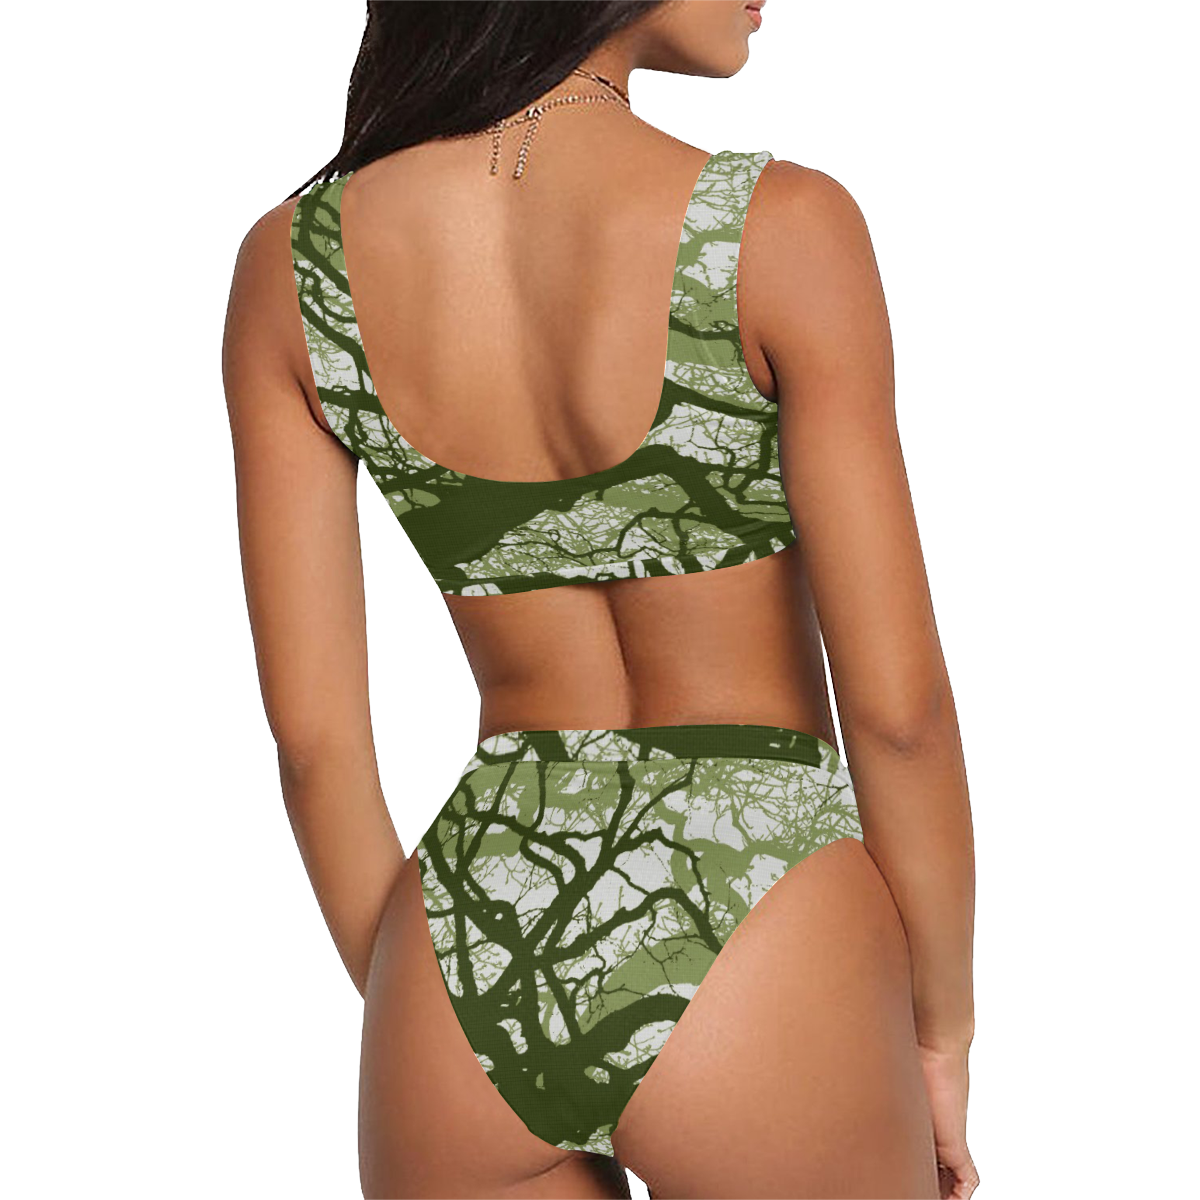 INTO THE FOREST 11 Sport Top & High-Waisted Bikini Swimsuit (Model S07)